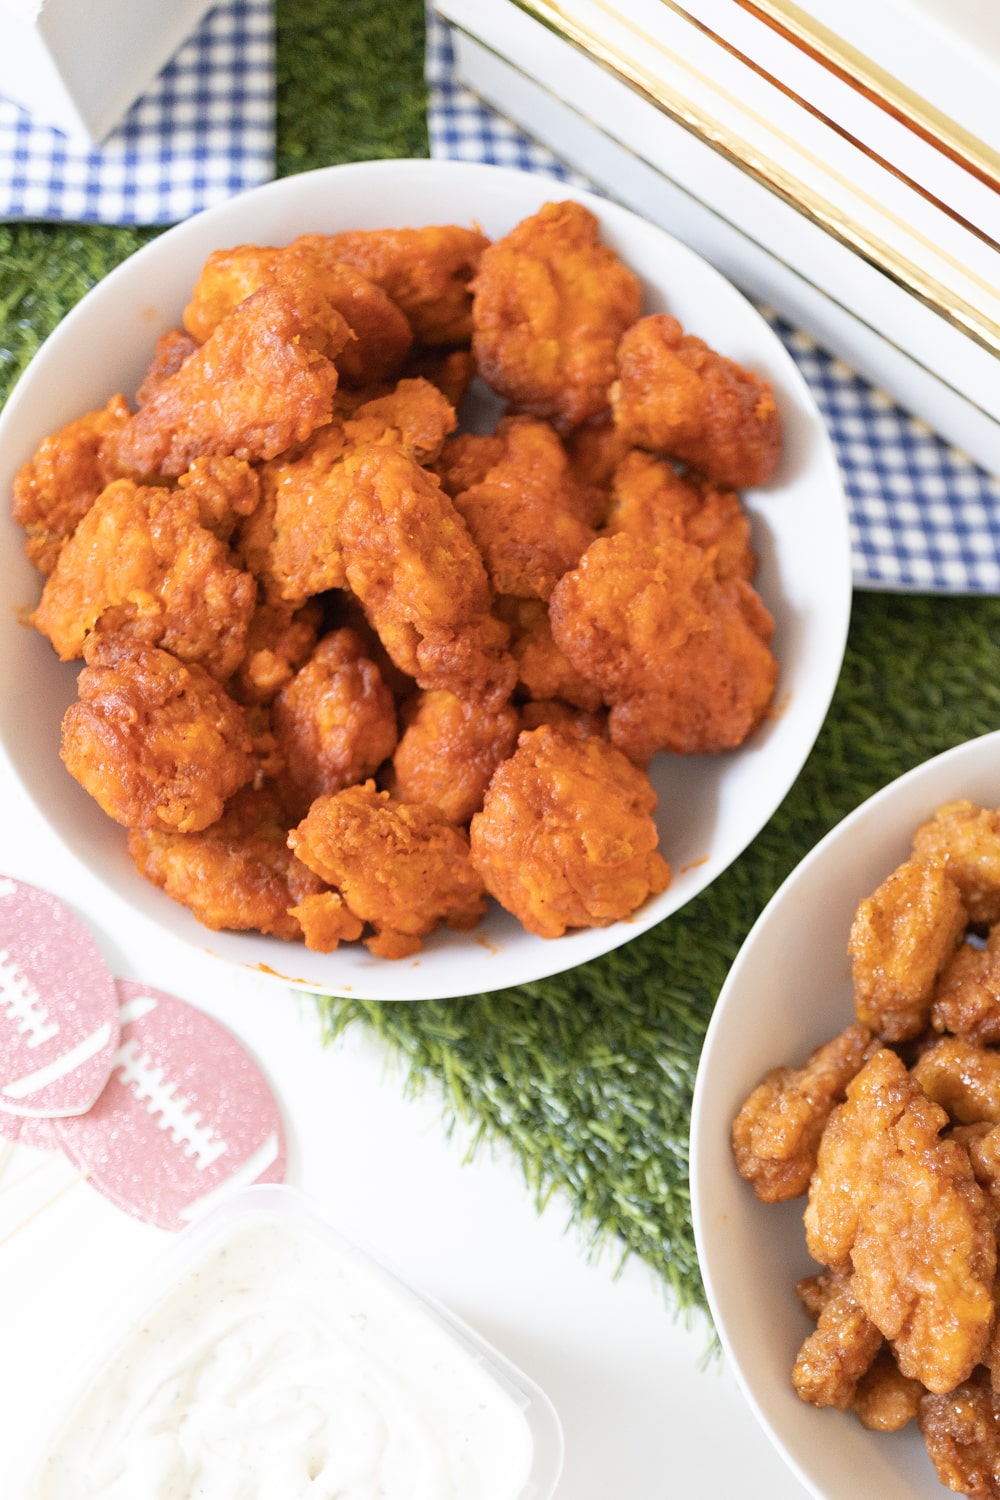 Hy-Vee boneless buffalo wings as part of a game day snack spread created by blogger Stephanie Ziajka on Diary of a Debutante